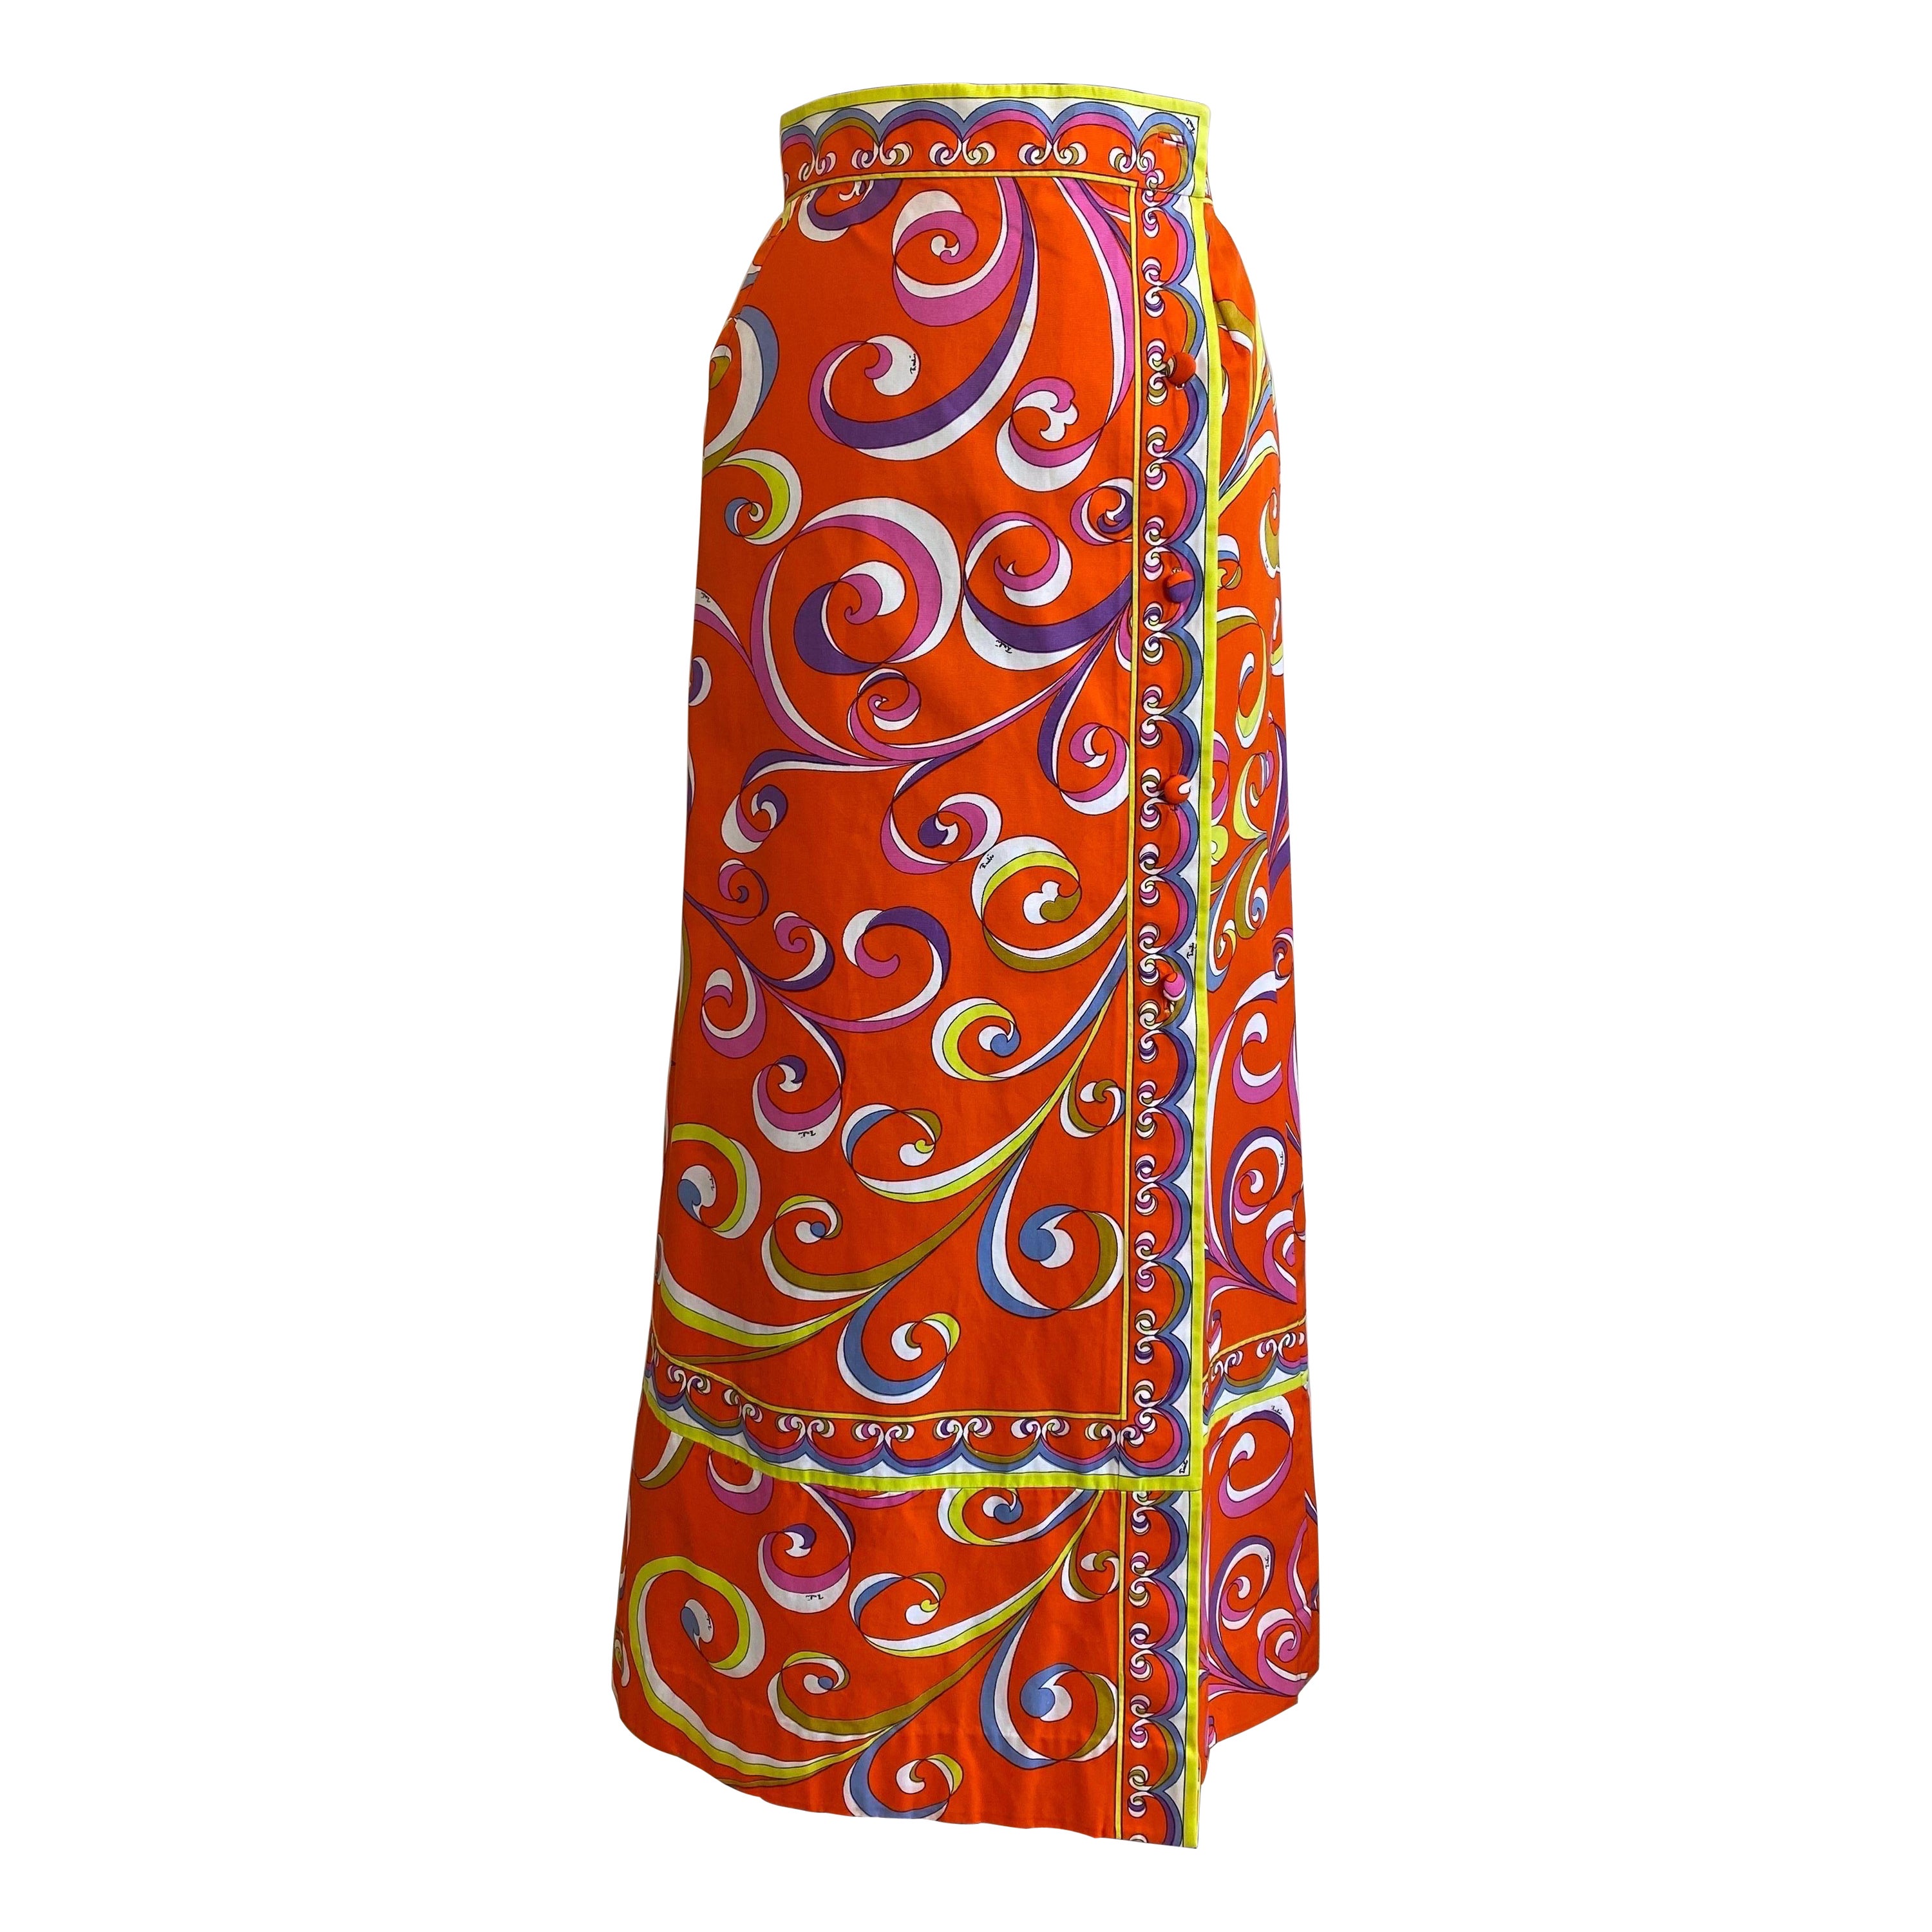 What are 60s skirts called?